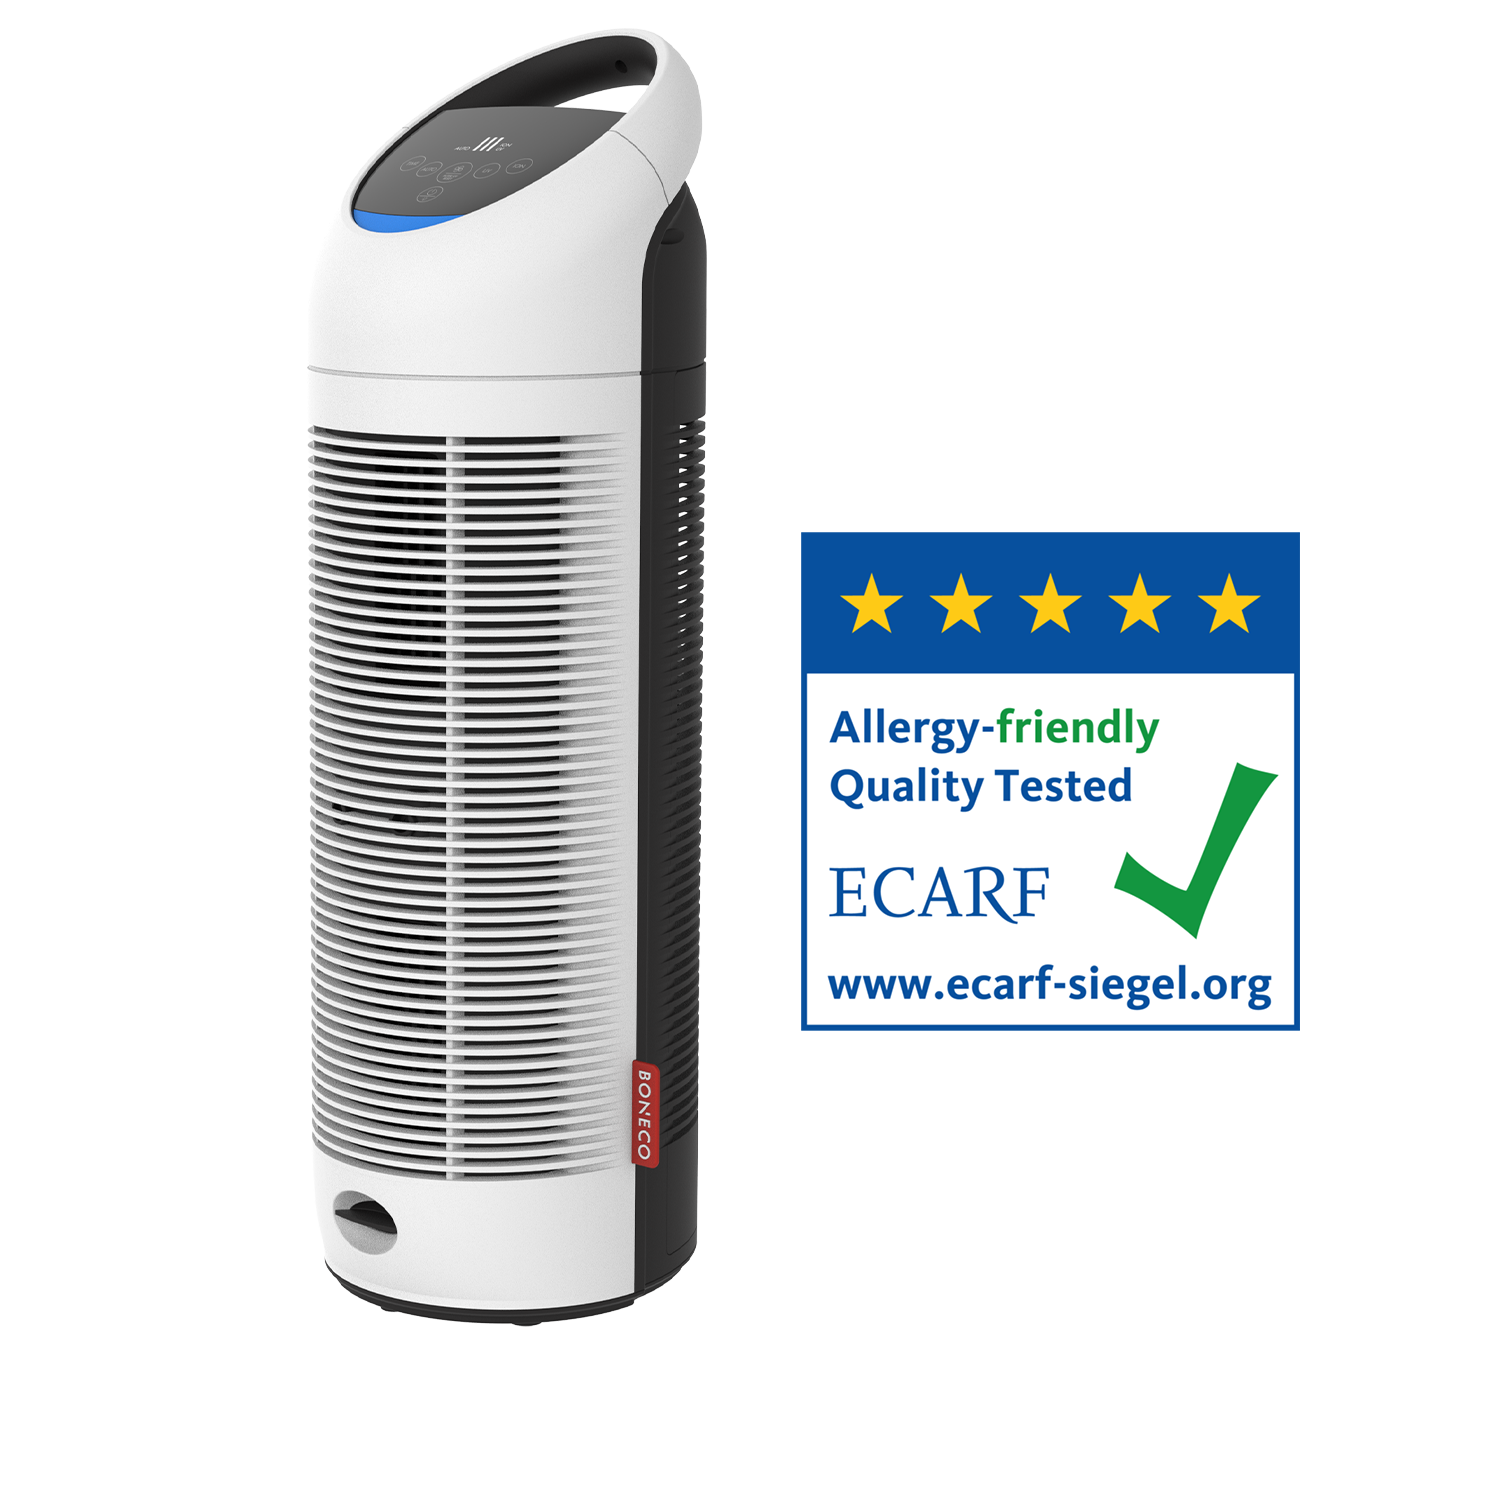 P370 BONECO Air Purifier ECARF Certified Allergy-firendly Quality Tested